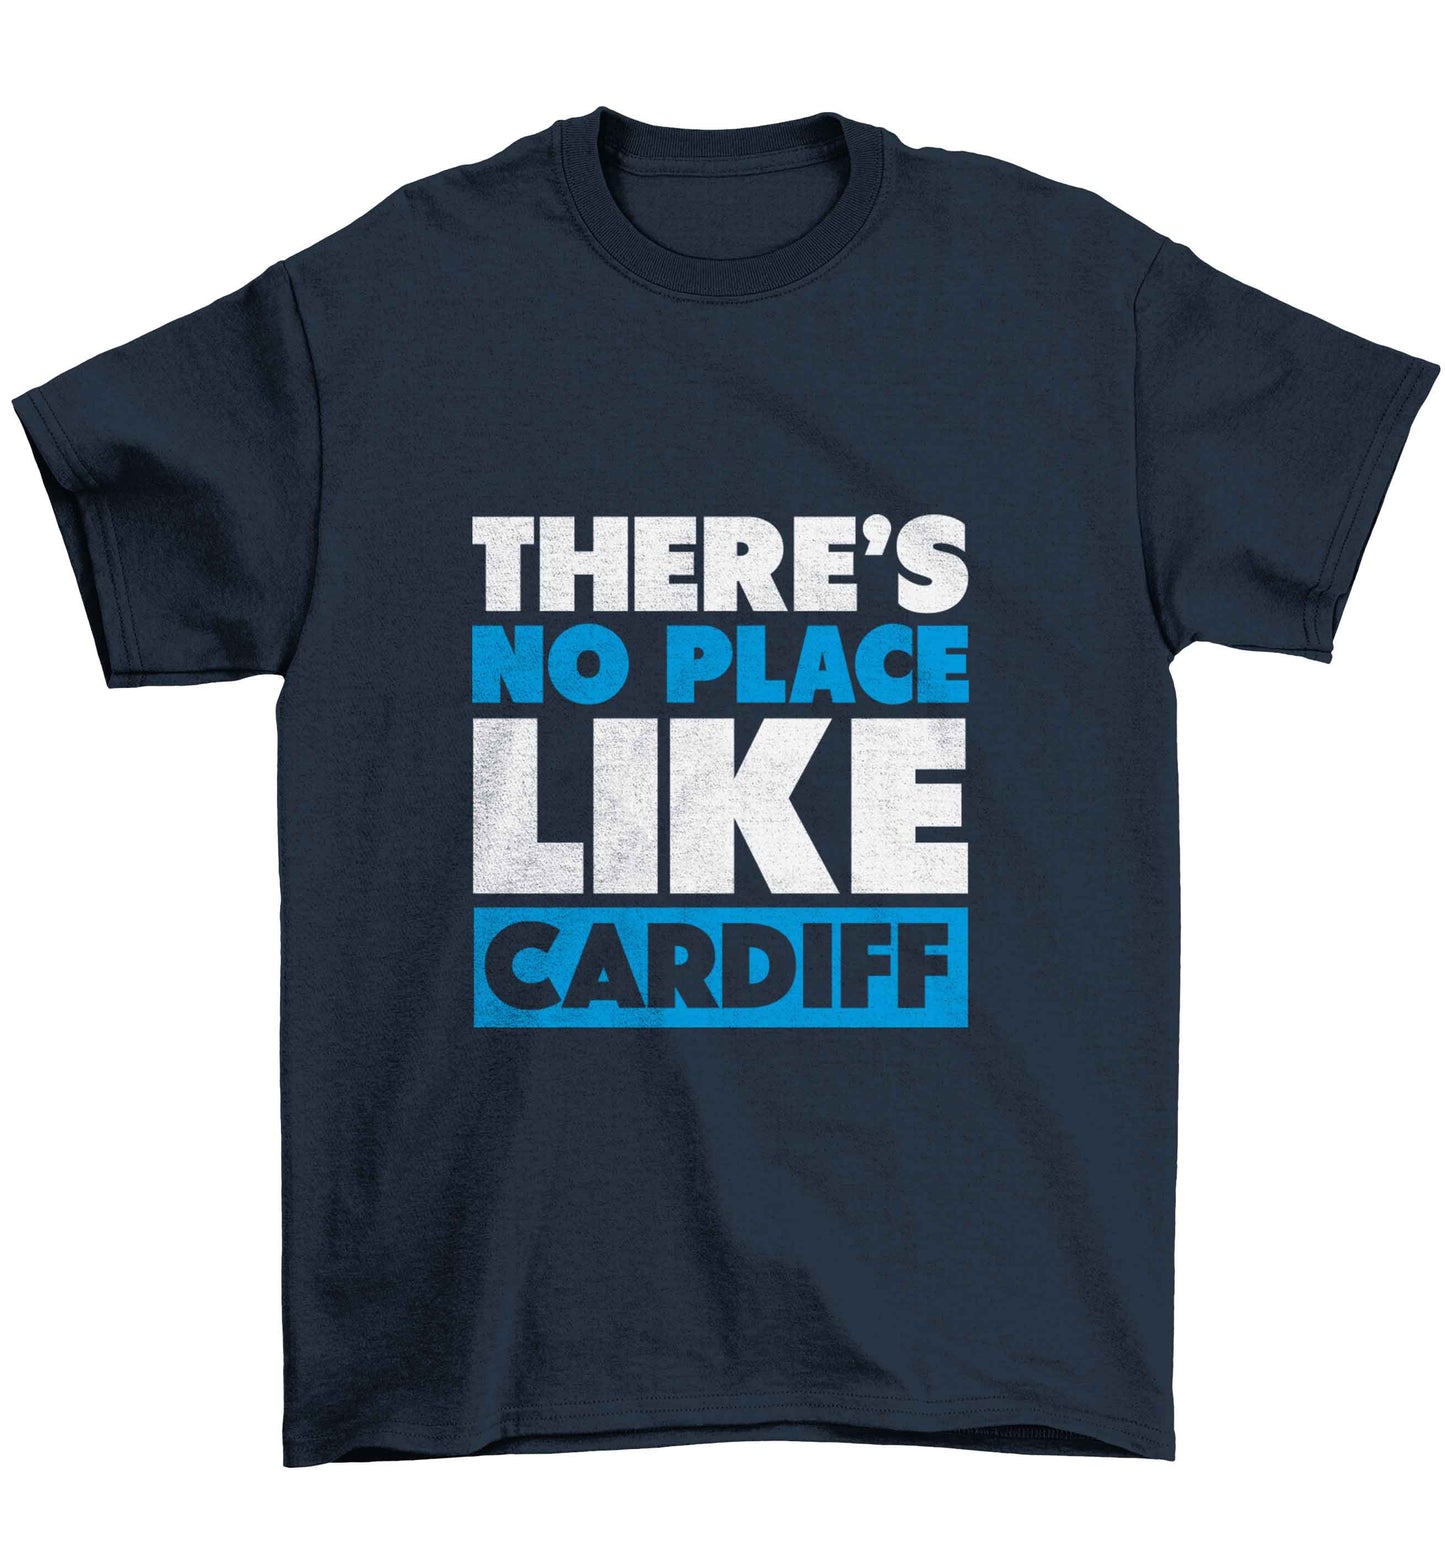 There's no place like Cardiff Children's navy Tshirt 12-13 Years